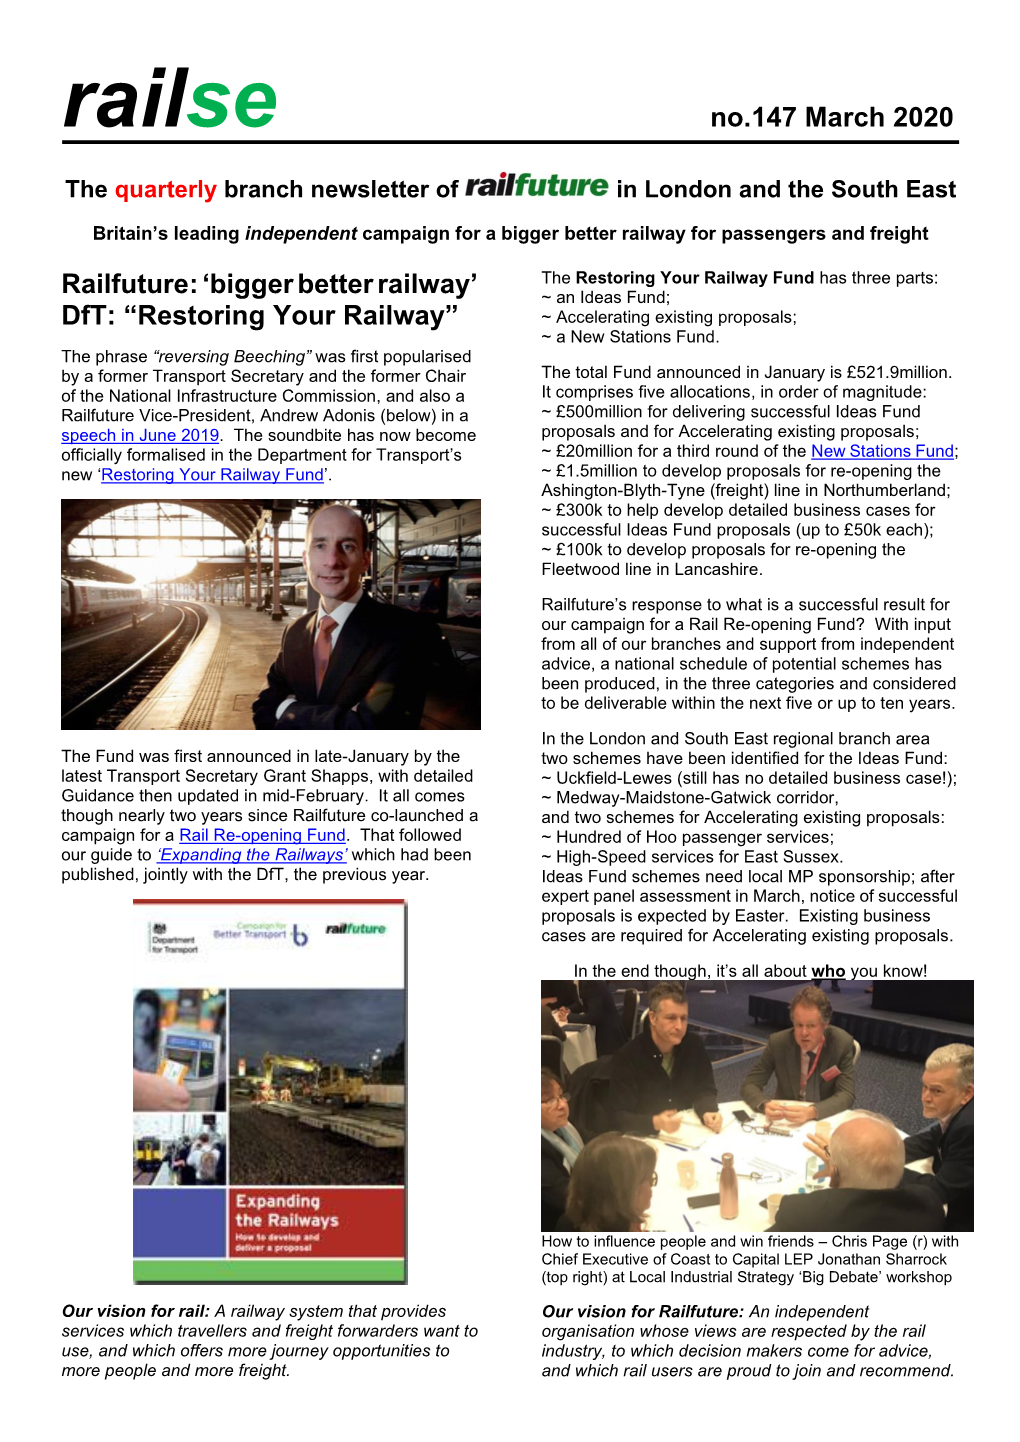 Dft: “Restoring Your Railway” ~ Accelerating Existing Proposals; ~ a New Stations Fund